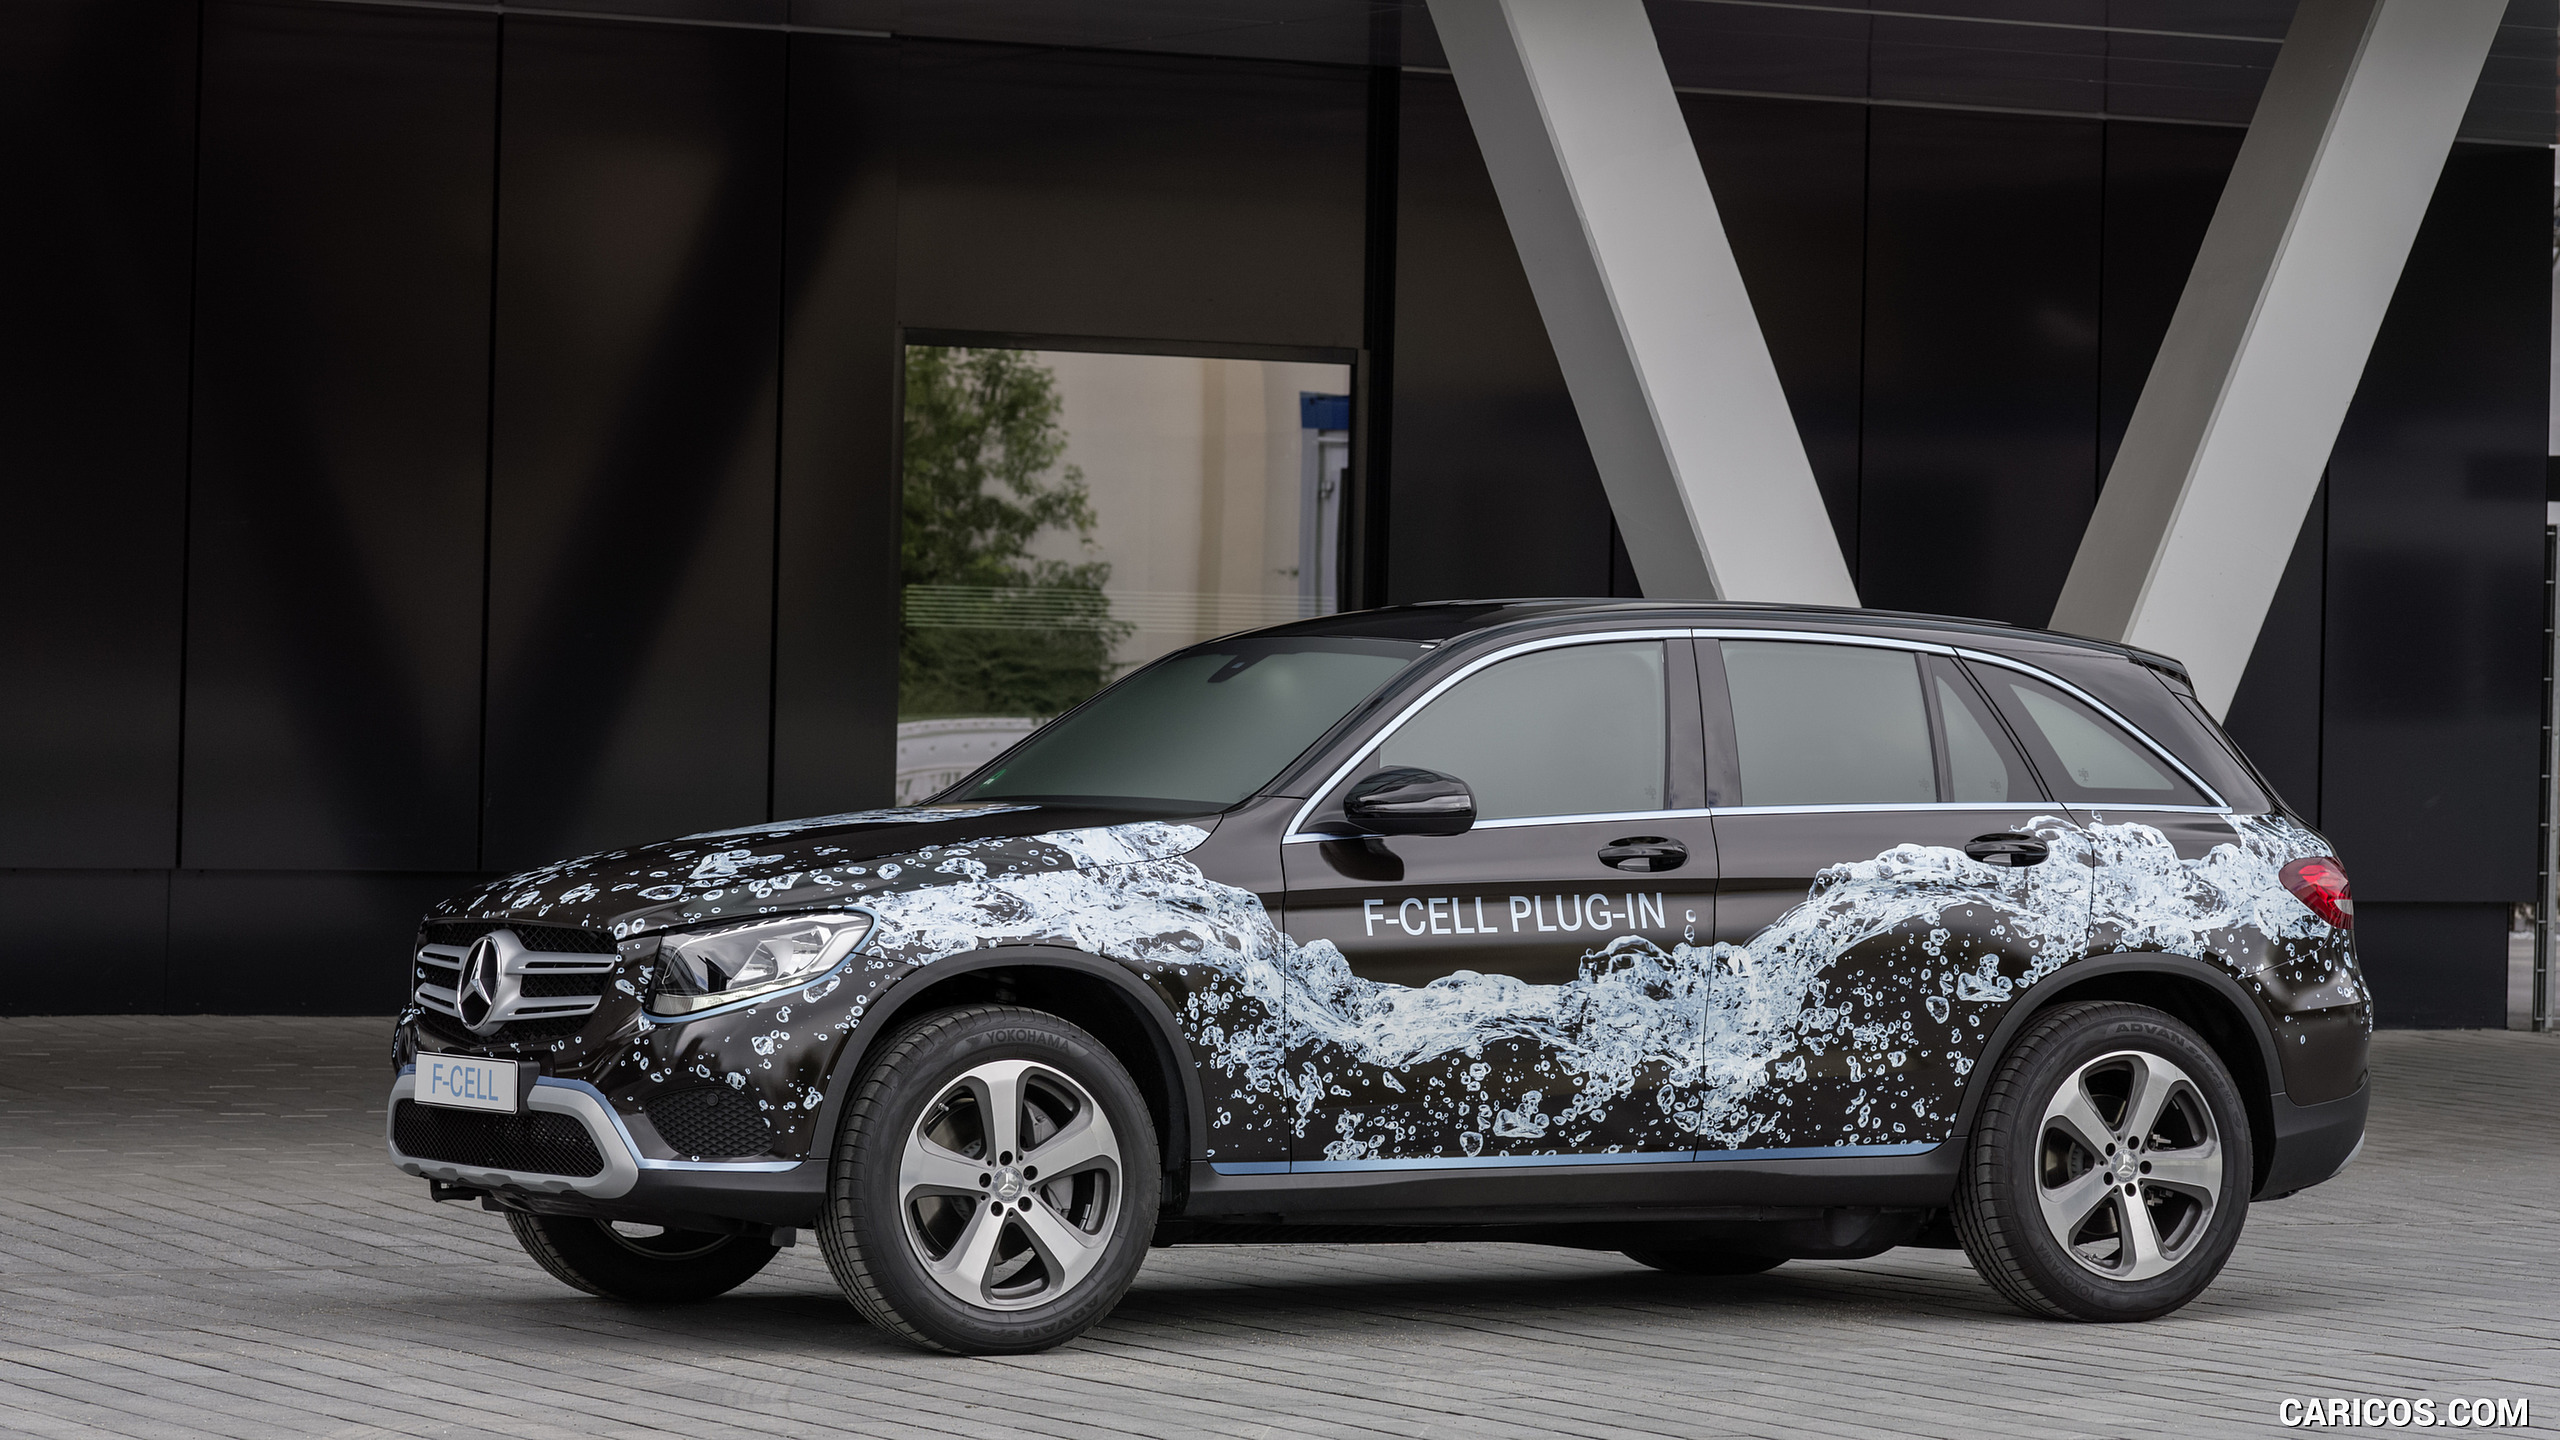 2016 Mercedes-Benz GLC F-Cell Plug-In Concept - Side, #9 of 20